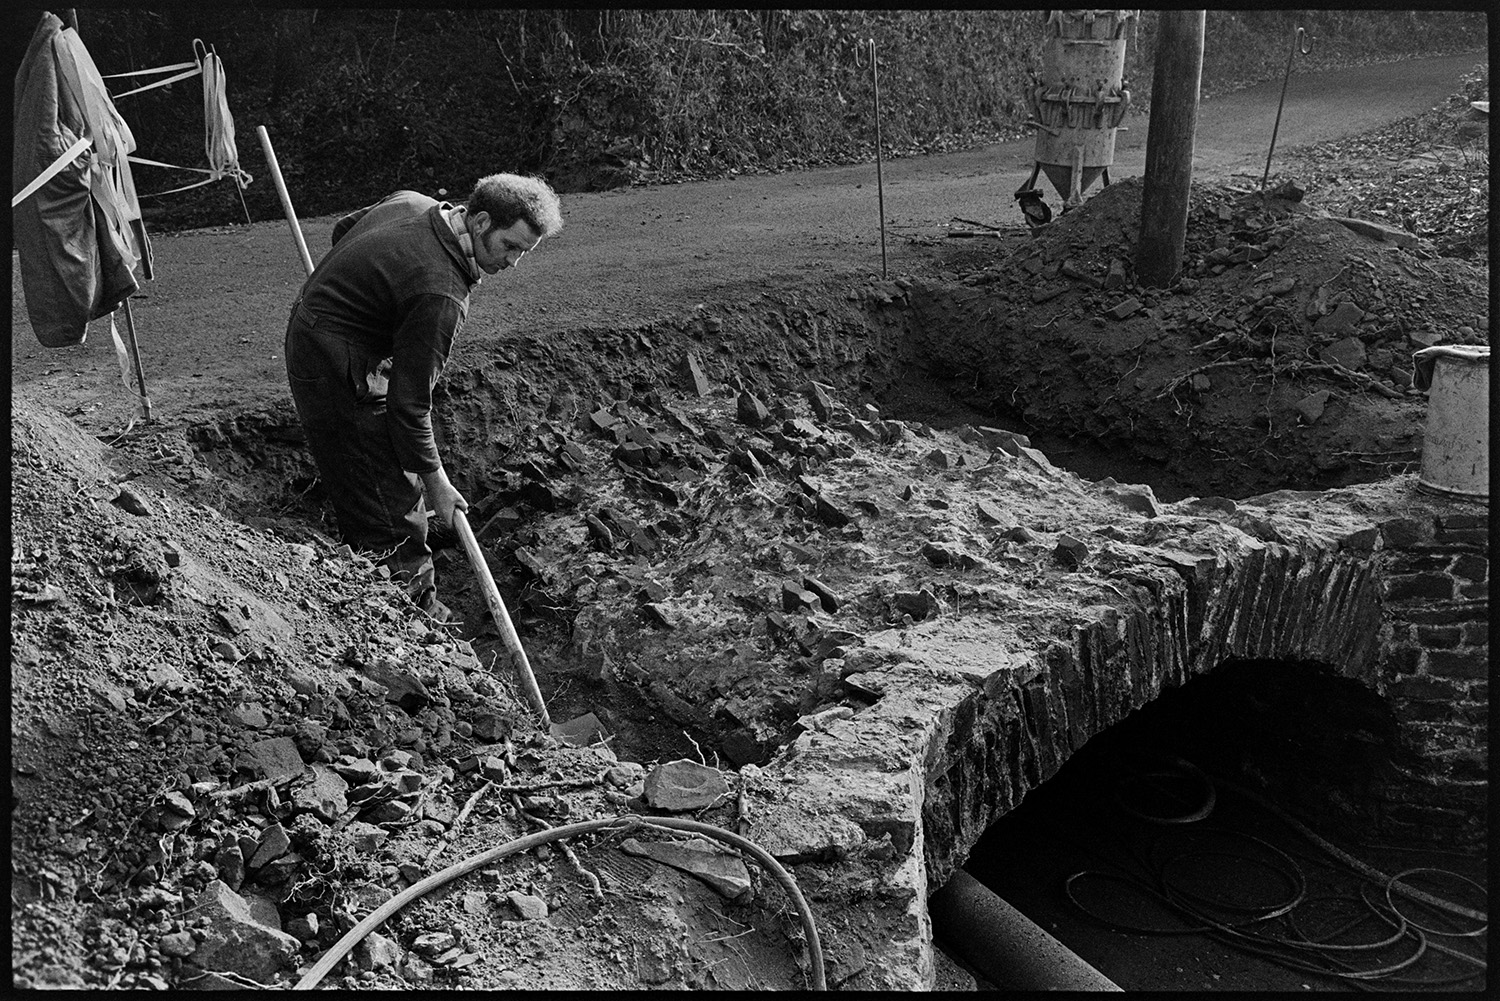 Men repairing bridge, details of construction. 
[A man repairing a bridge at Addisford, Dolton. He is digging out earth using a shovel. A road going over the top of the bridge can be seen behind him.]